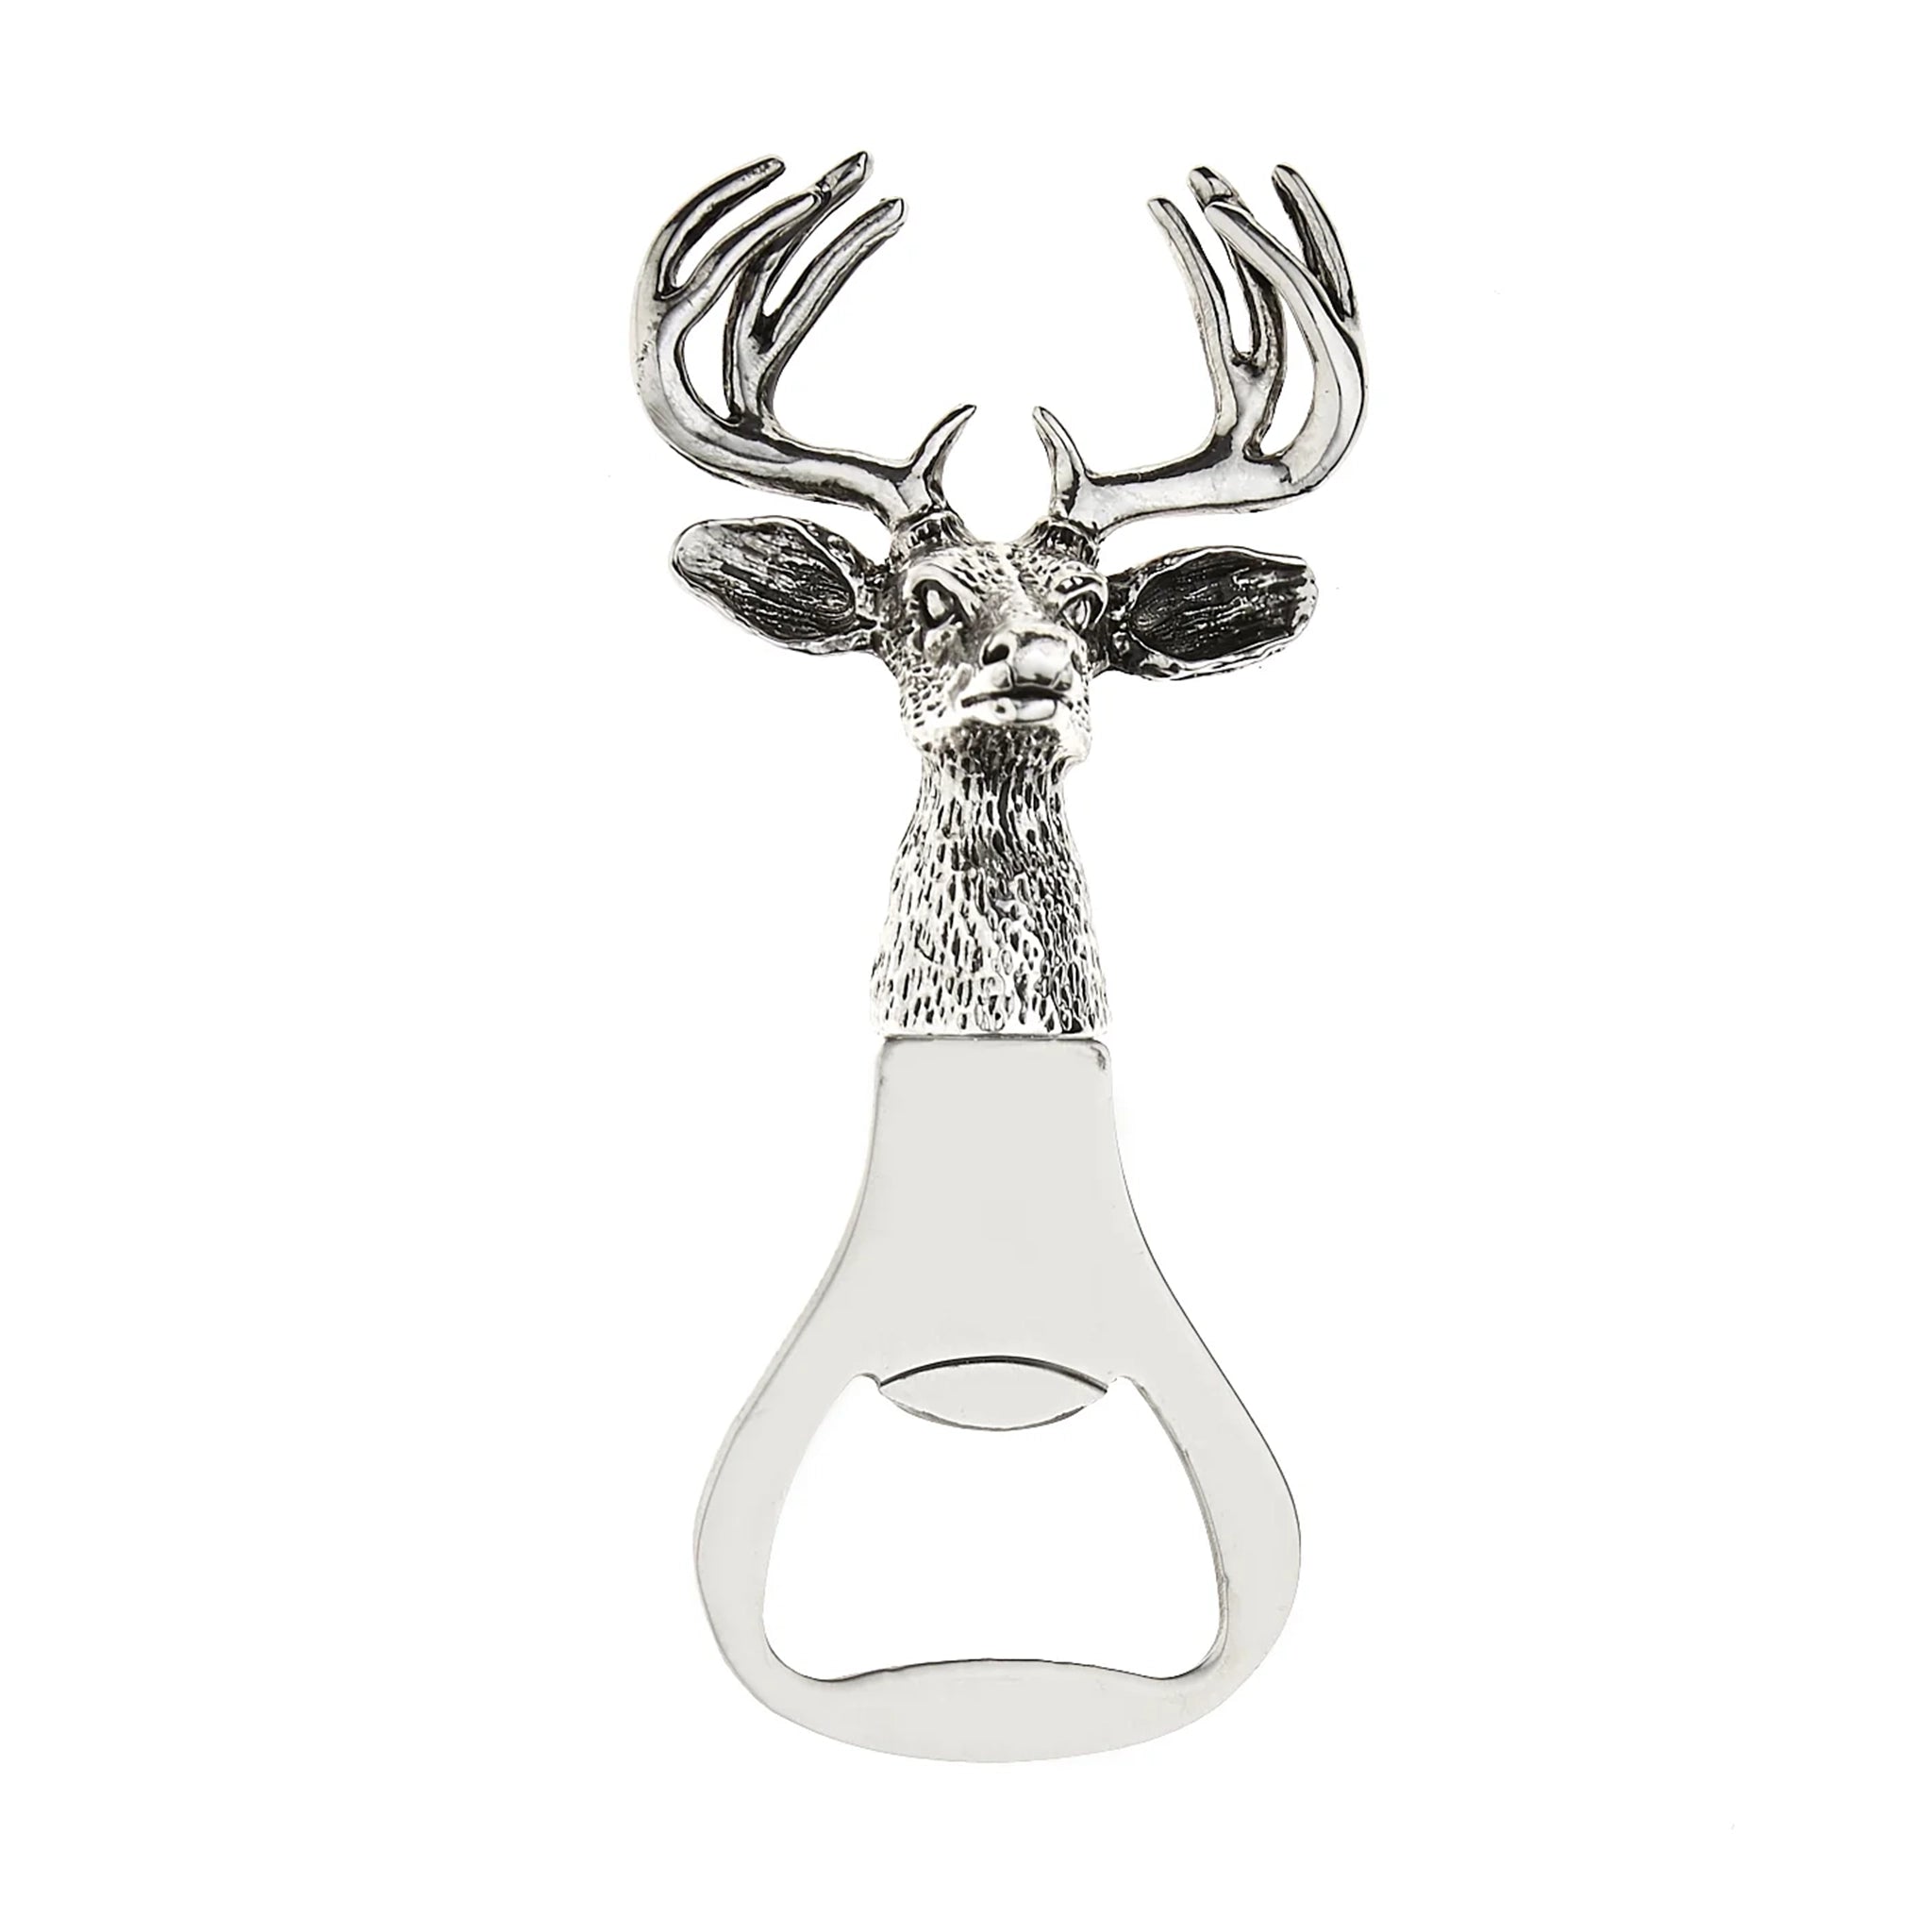 Stag head shaped bottle opener